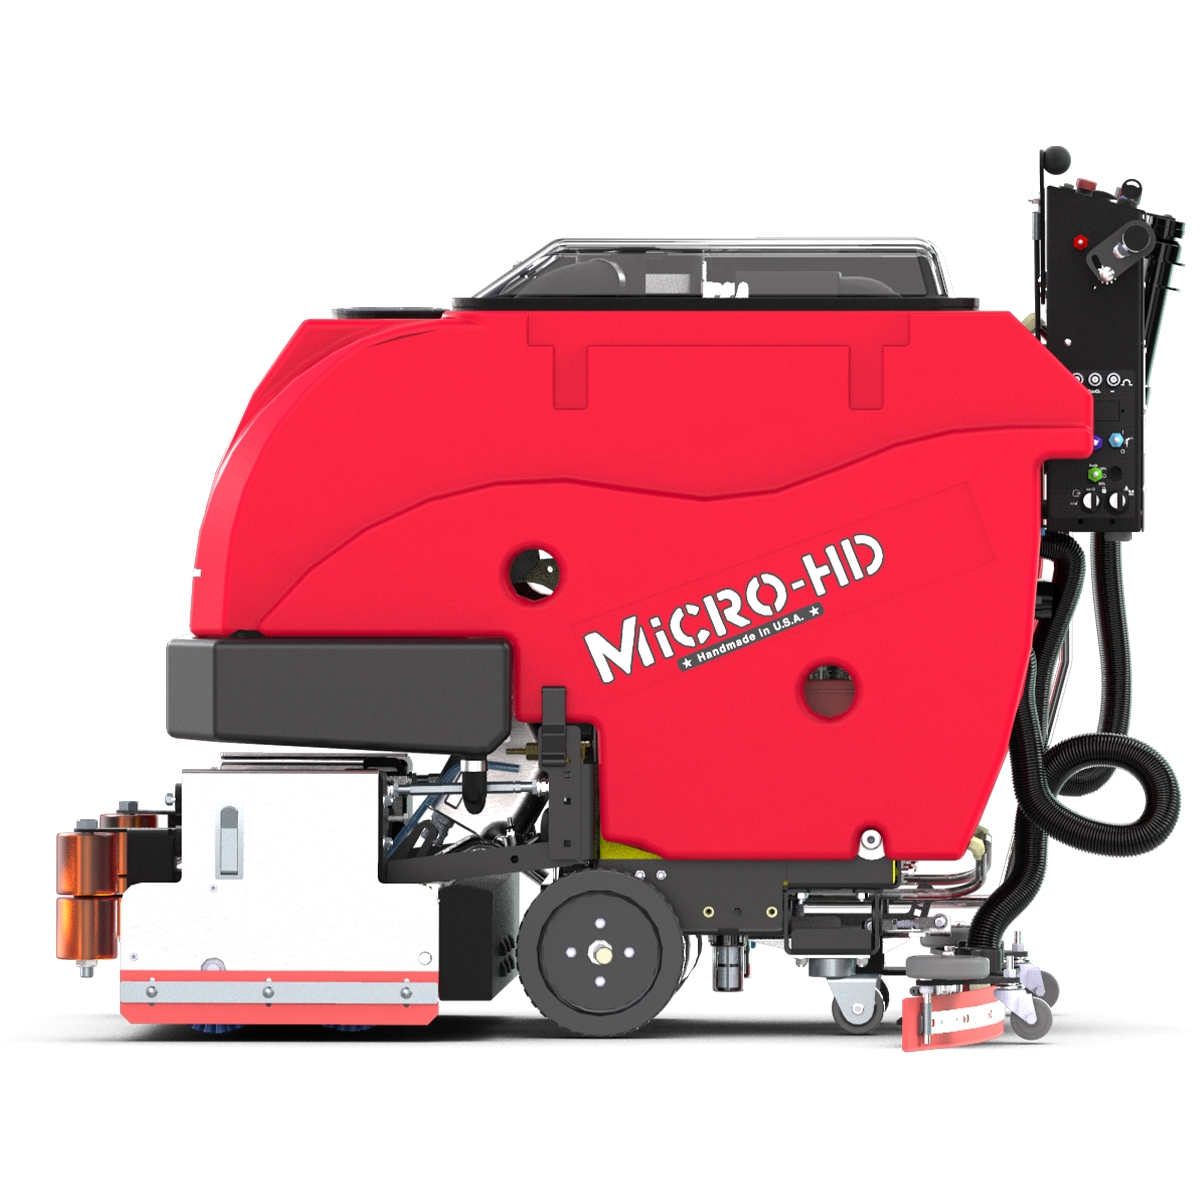 FactoryCat MICRO-HD Floor Scrubber is shown in side view profile.